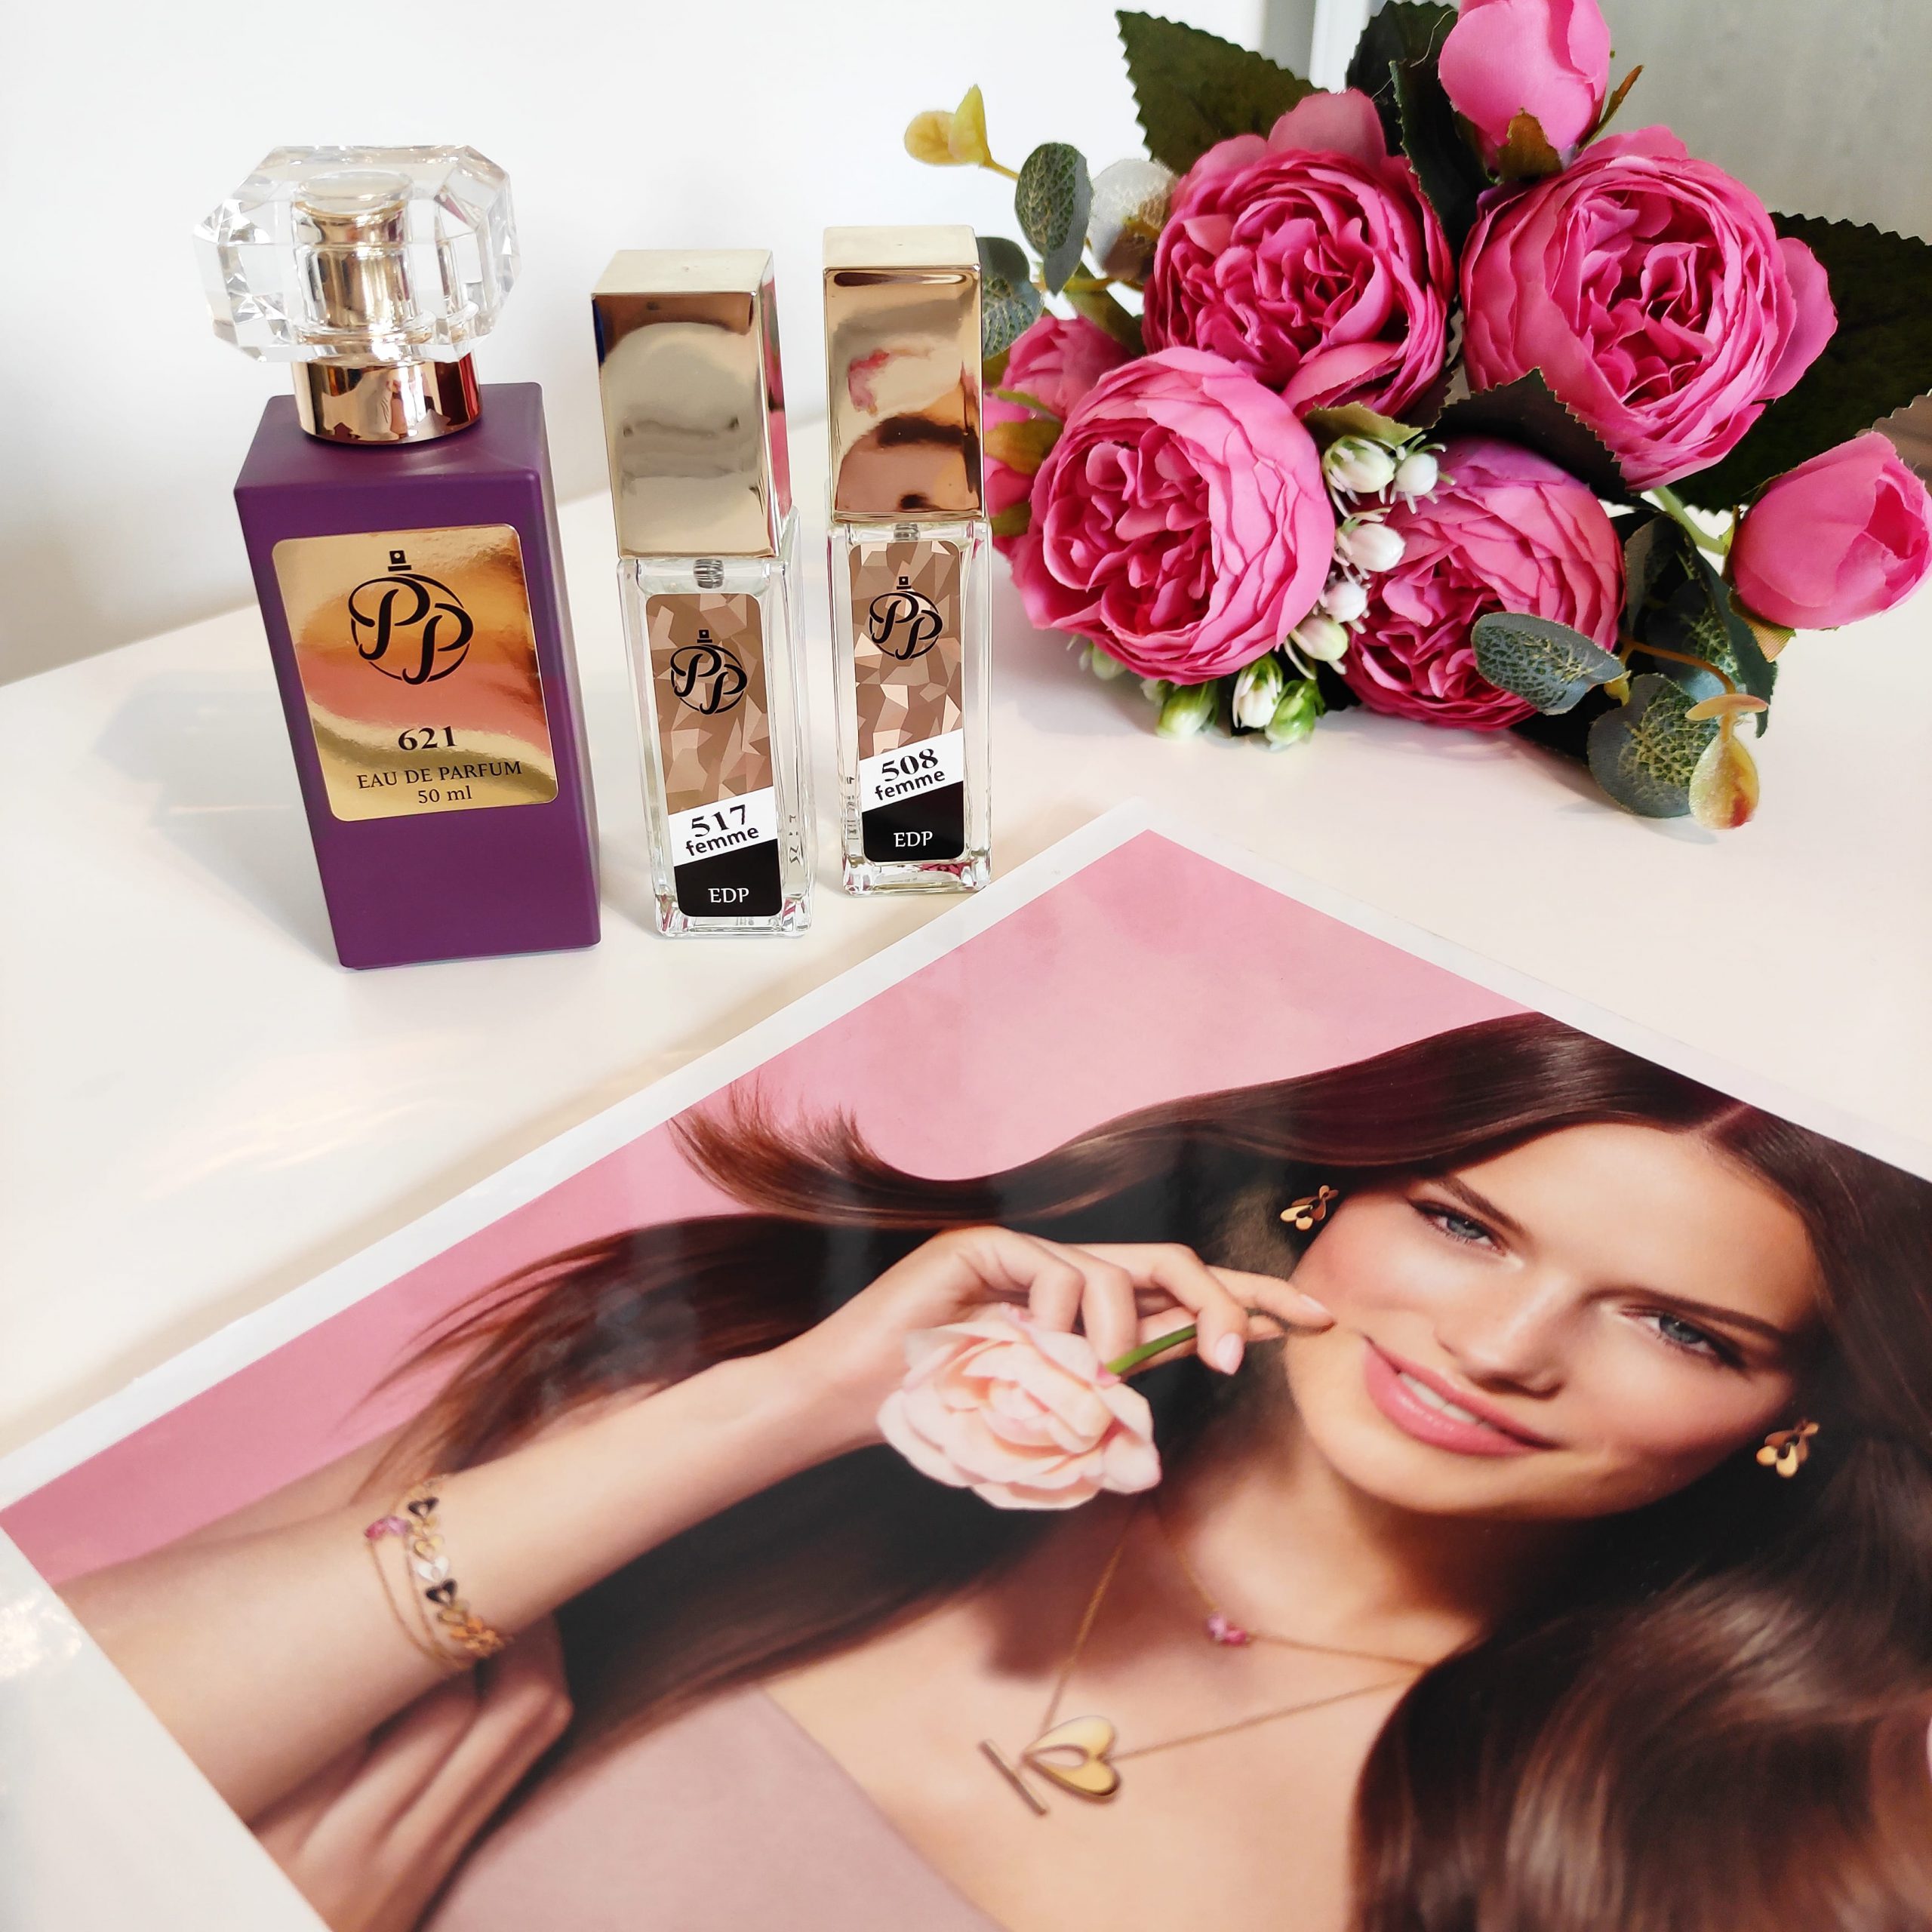 Read more about the article Lane Perfumy Premium.